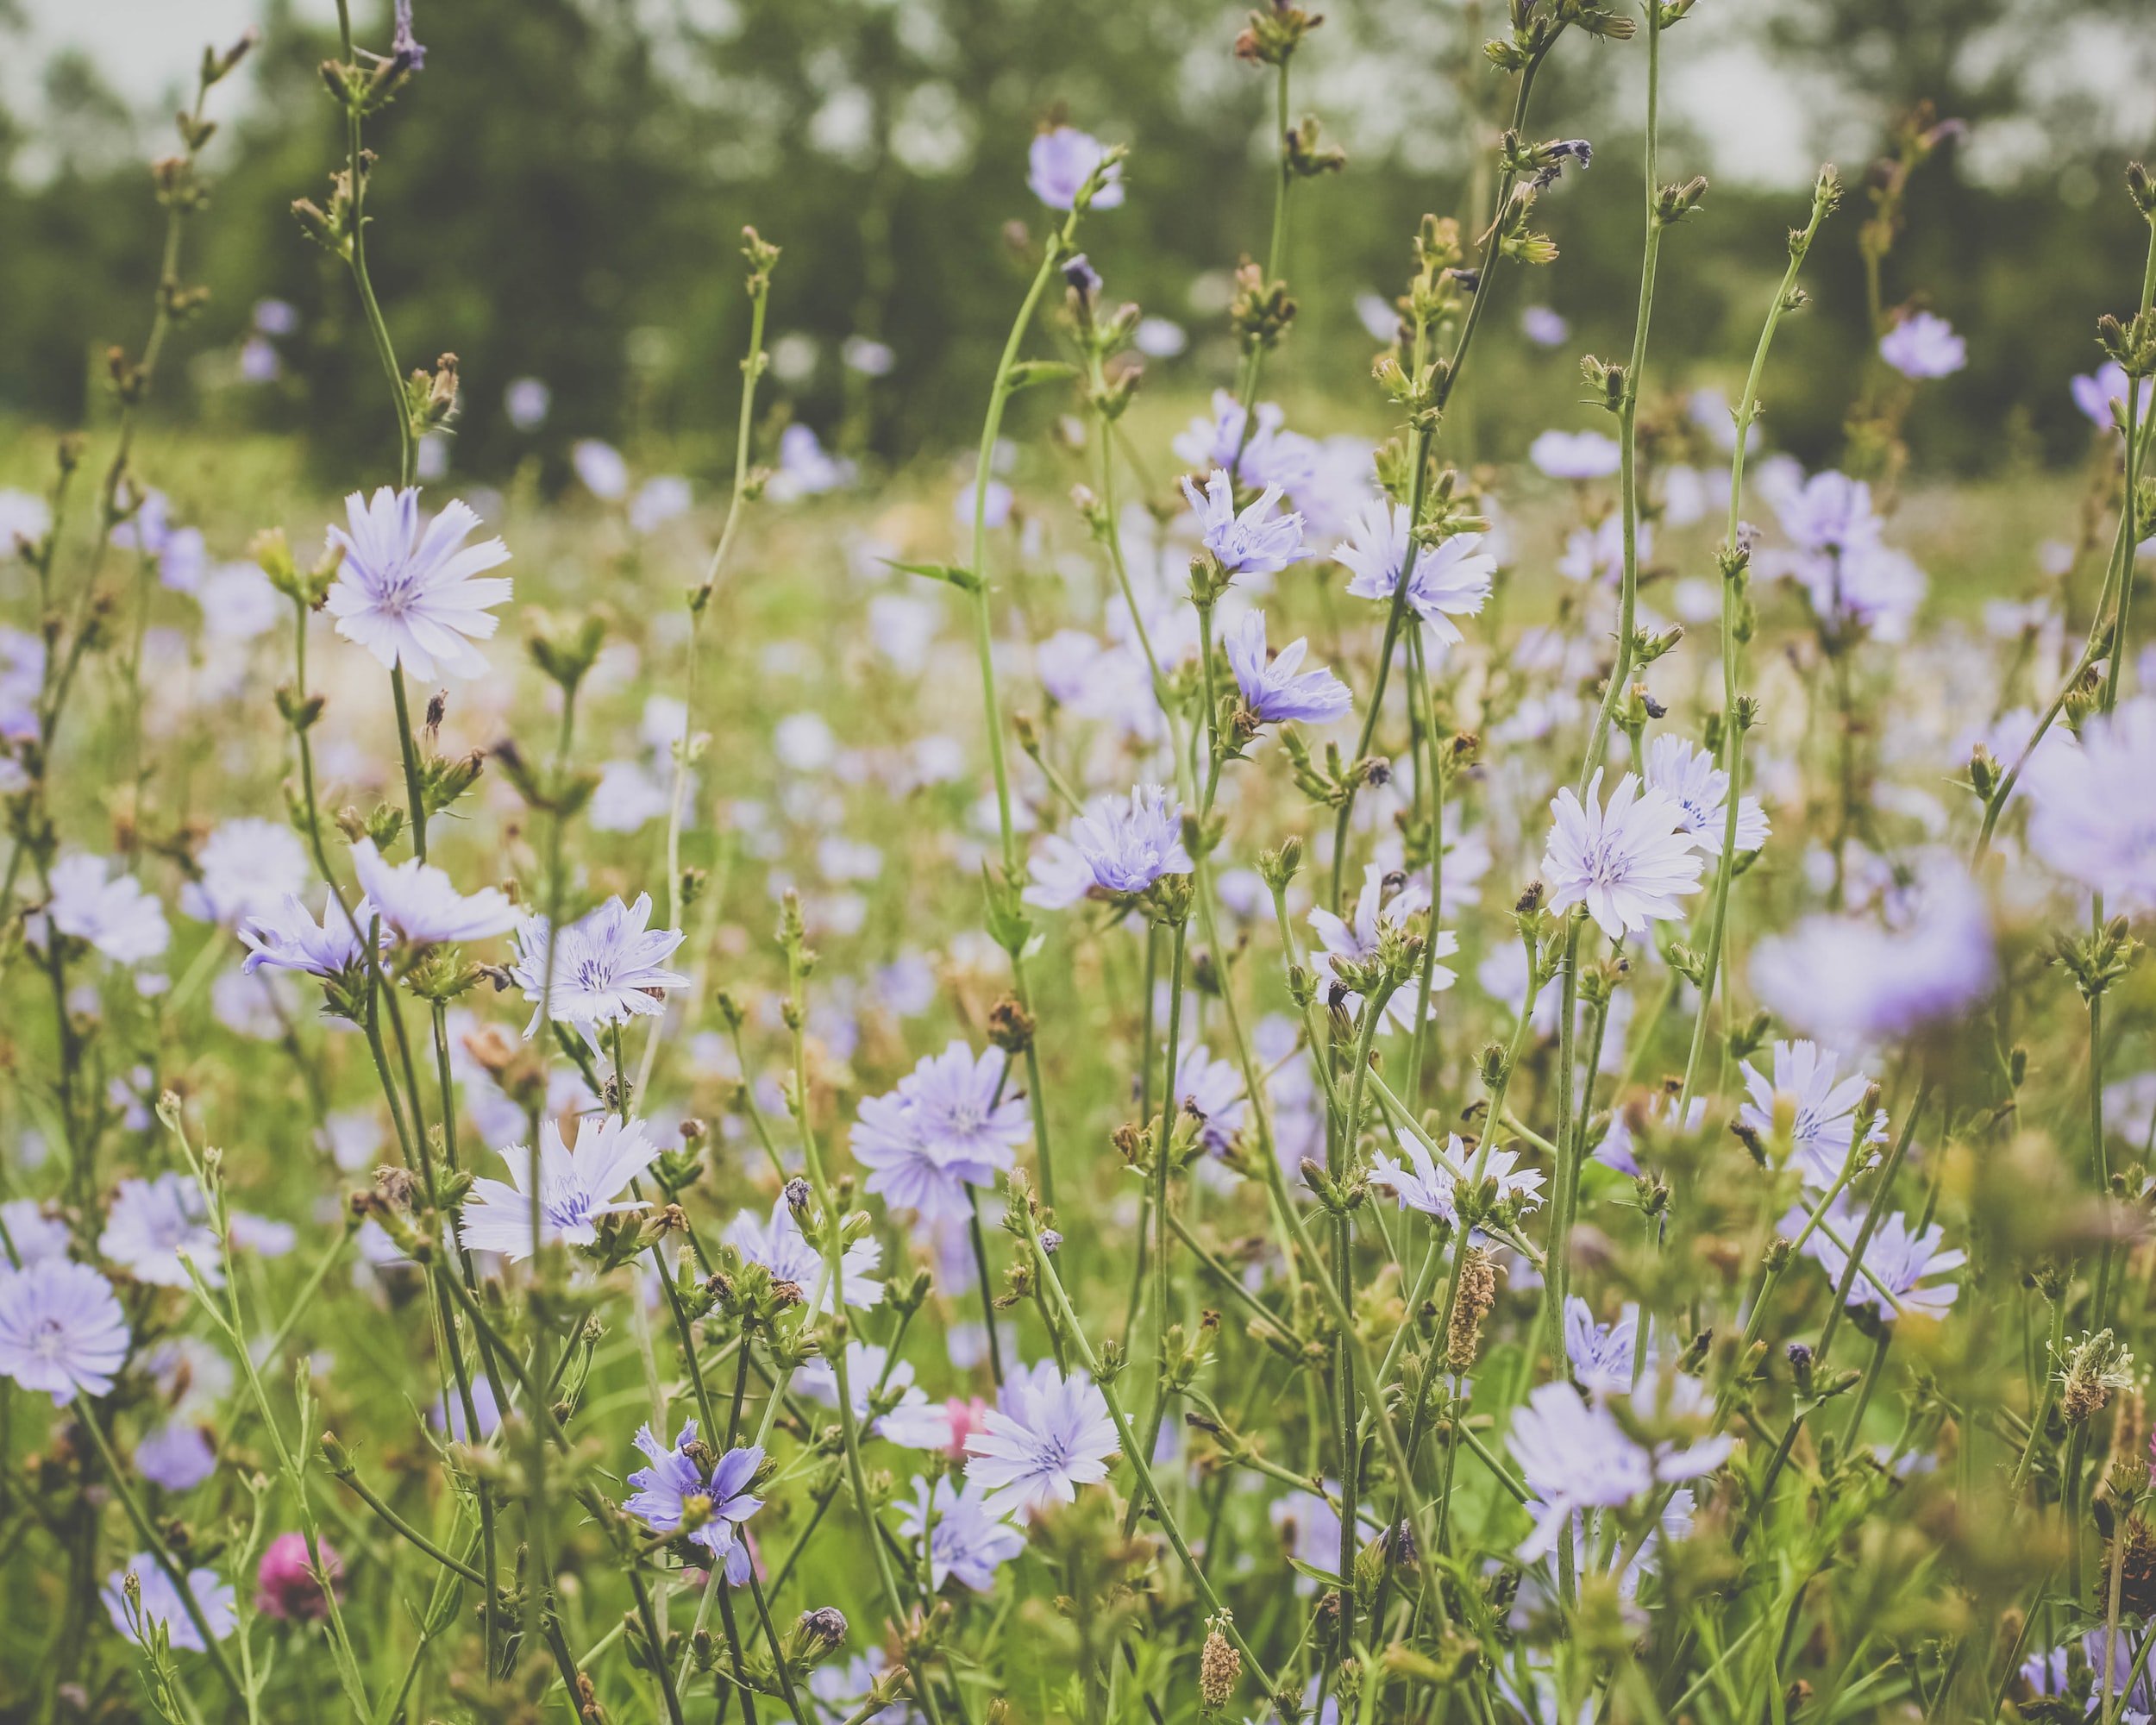 Wildflower Lawn Tips - What to Know Before Planting